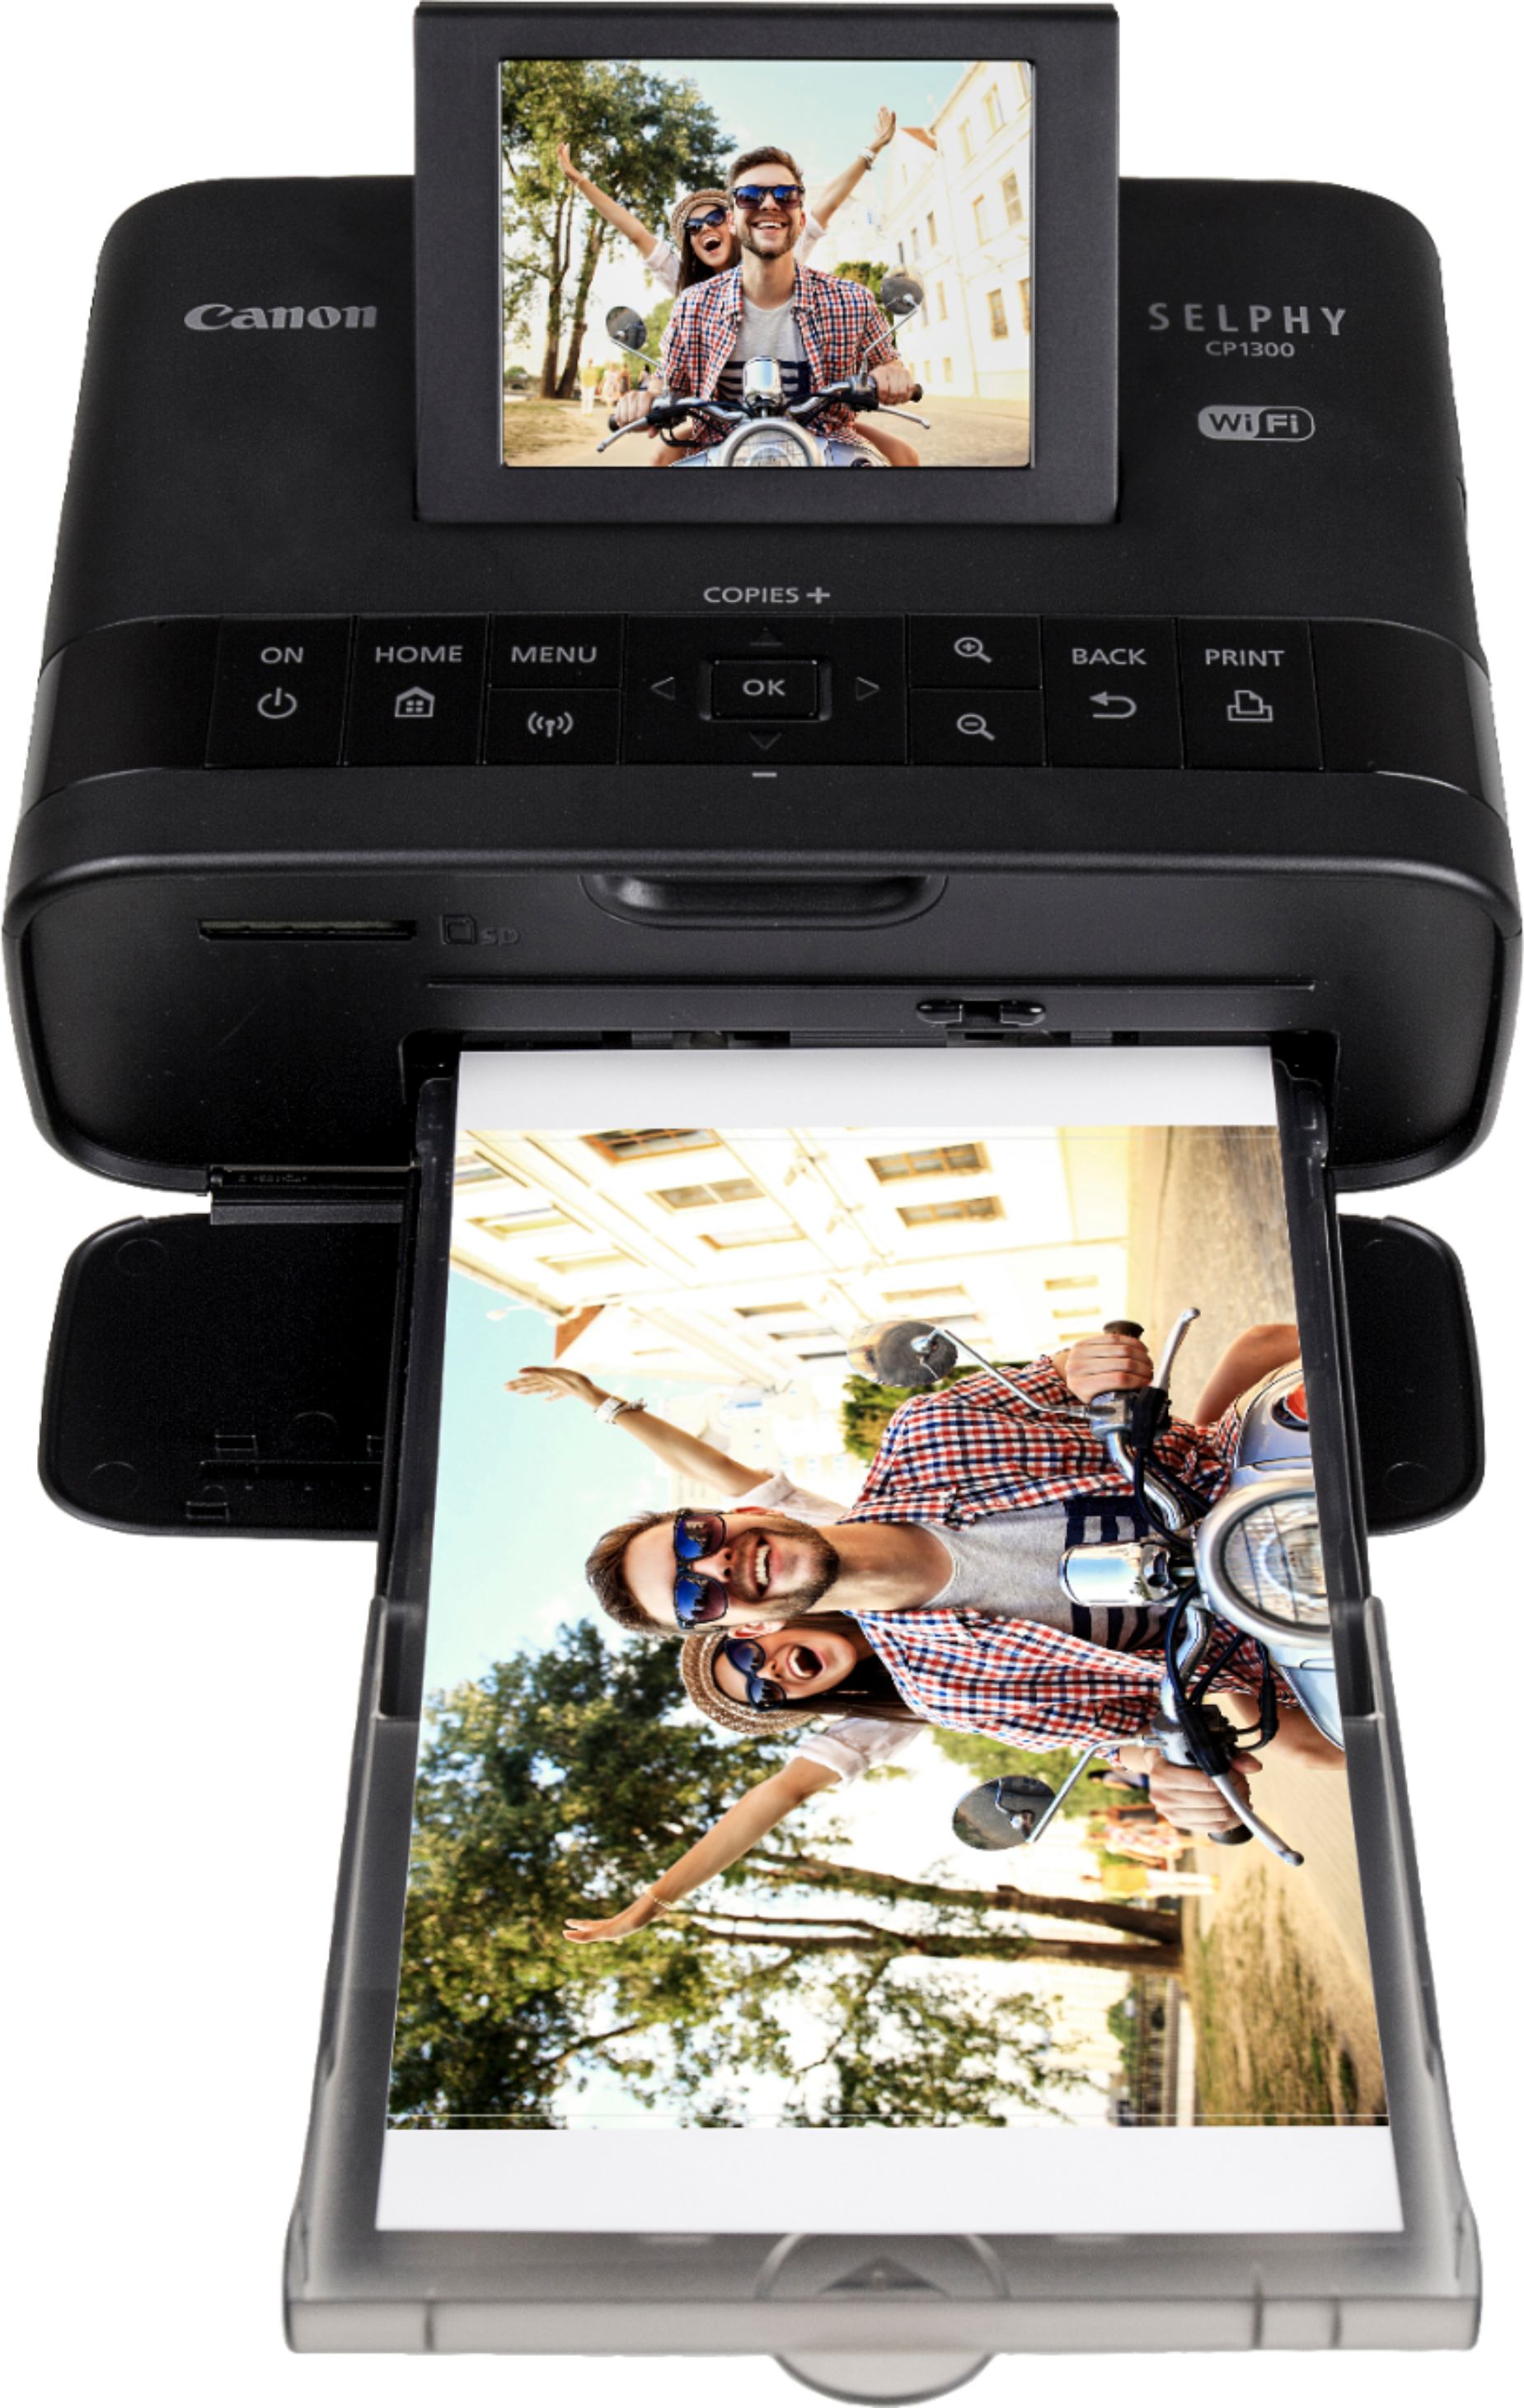  Canon SELPHY CP1300 Wireless Portable Photo Printer with Color  Ink & 108 Paper Sheets Set, USB Cable & Cleaning Cloth - Inkjet Laser 4x6  Label, Air Print app, LCD Screen